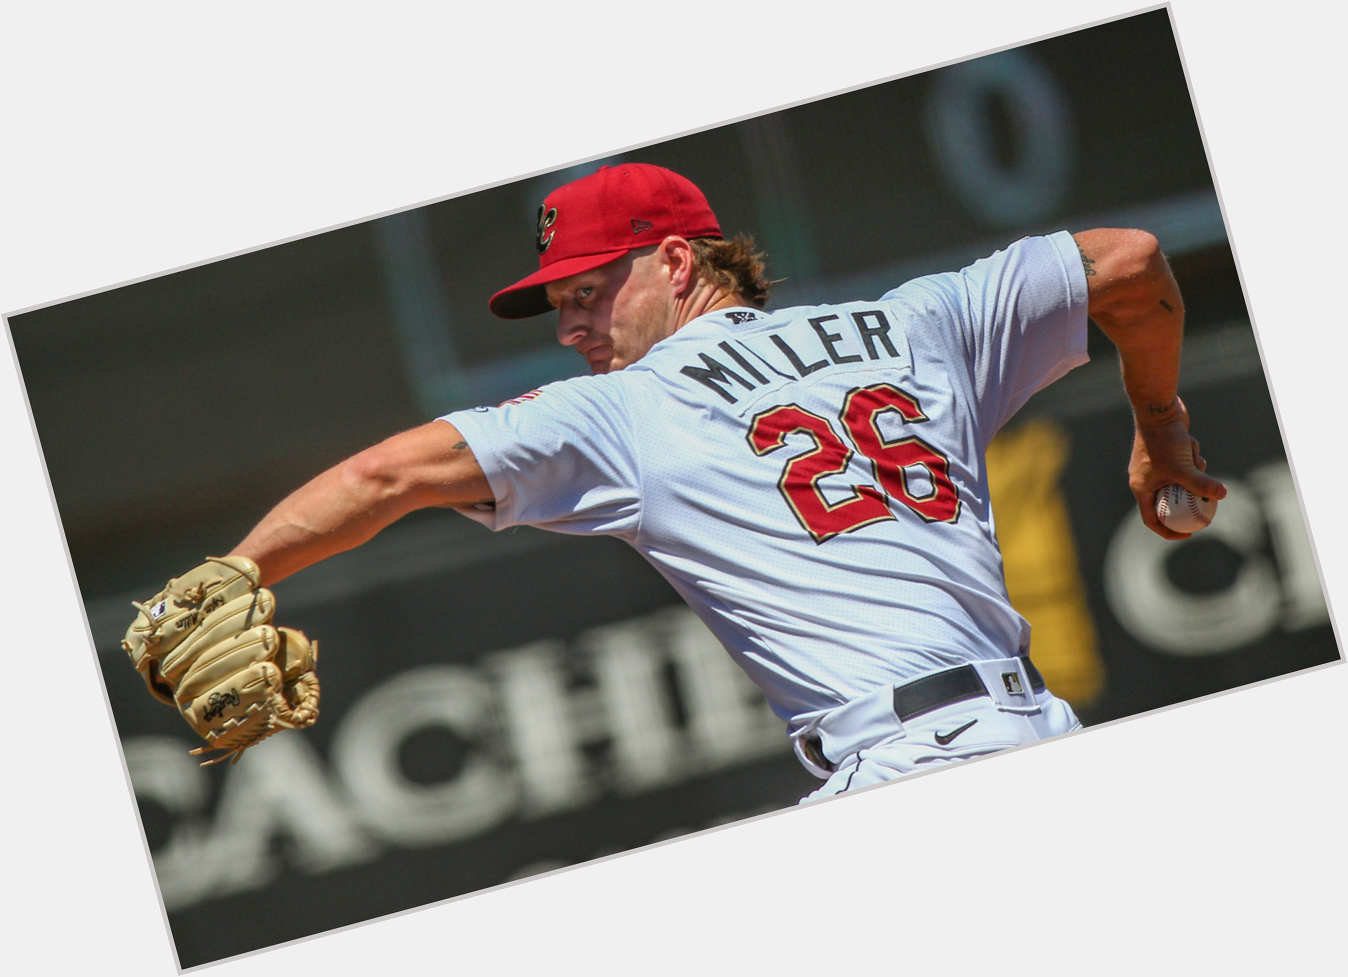 A big HAPPY BIRTHDAY to these Cats: Shelby Miller, Adrian Cardenas, and Brad Ziegler! 